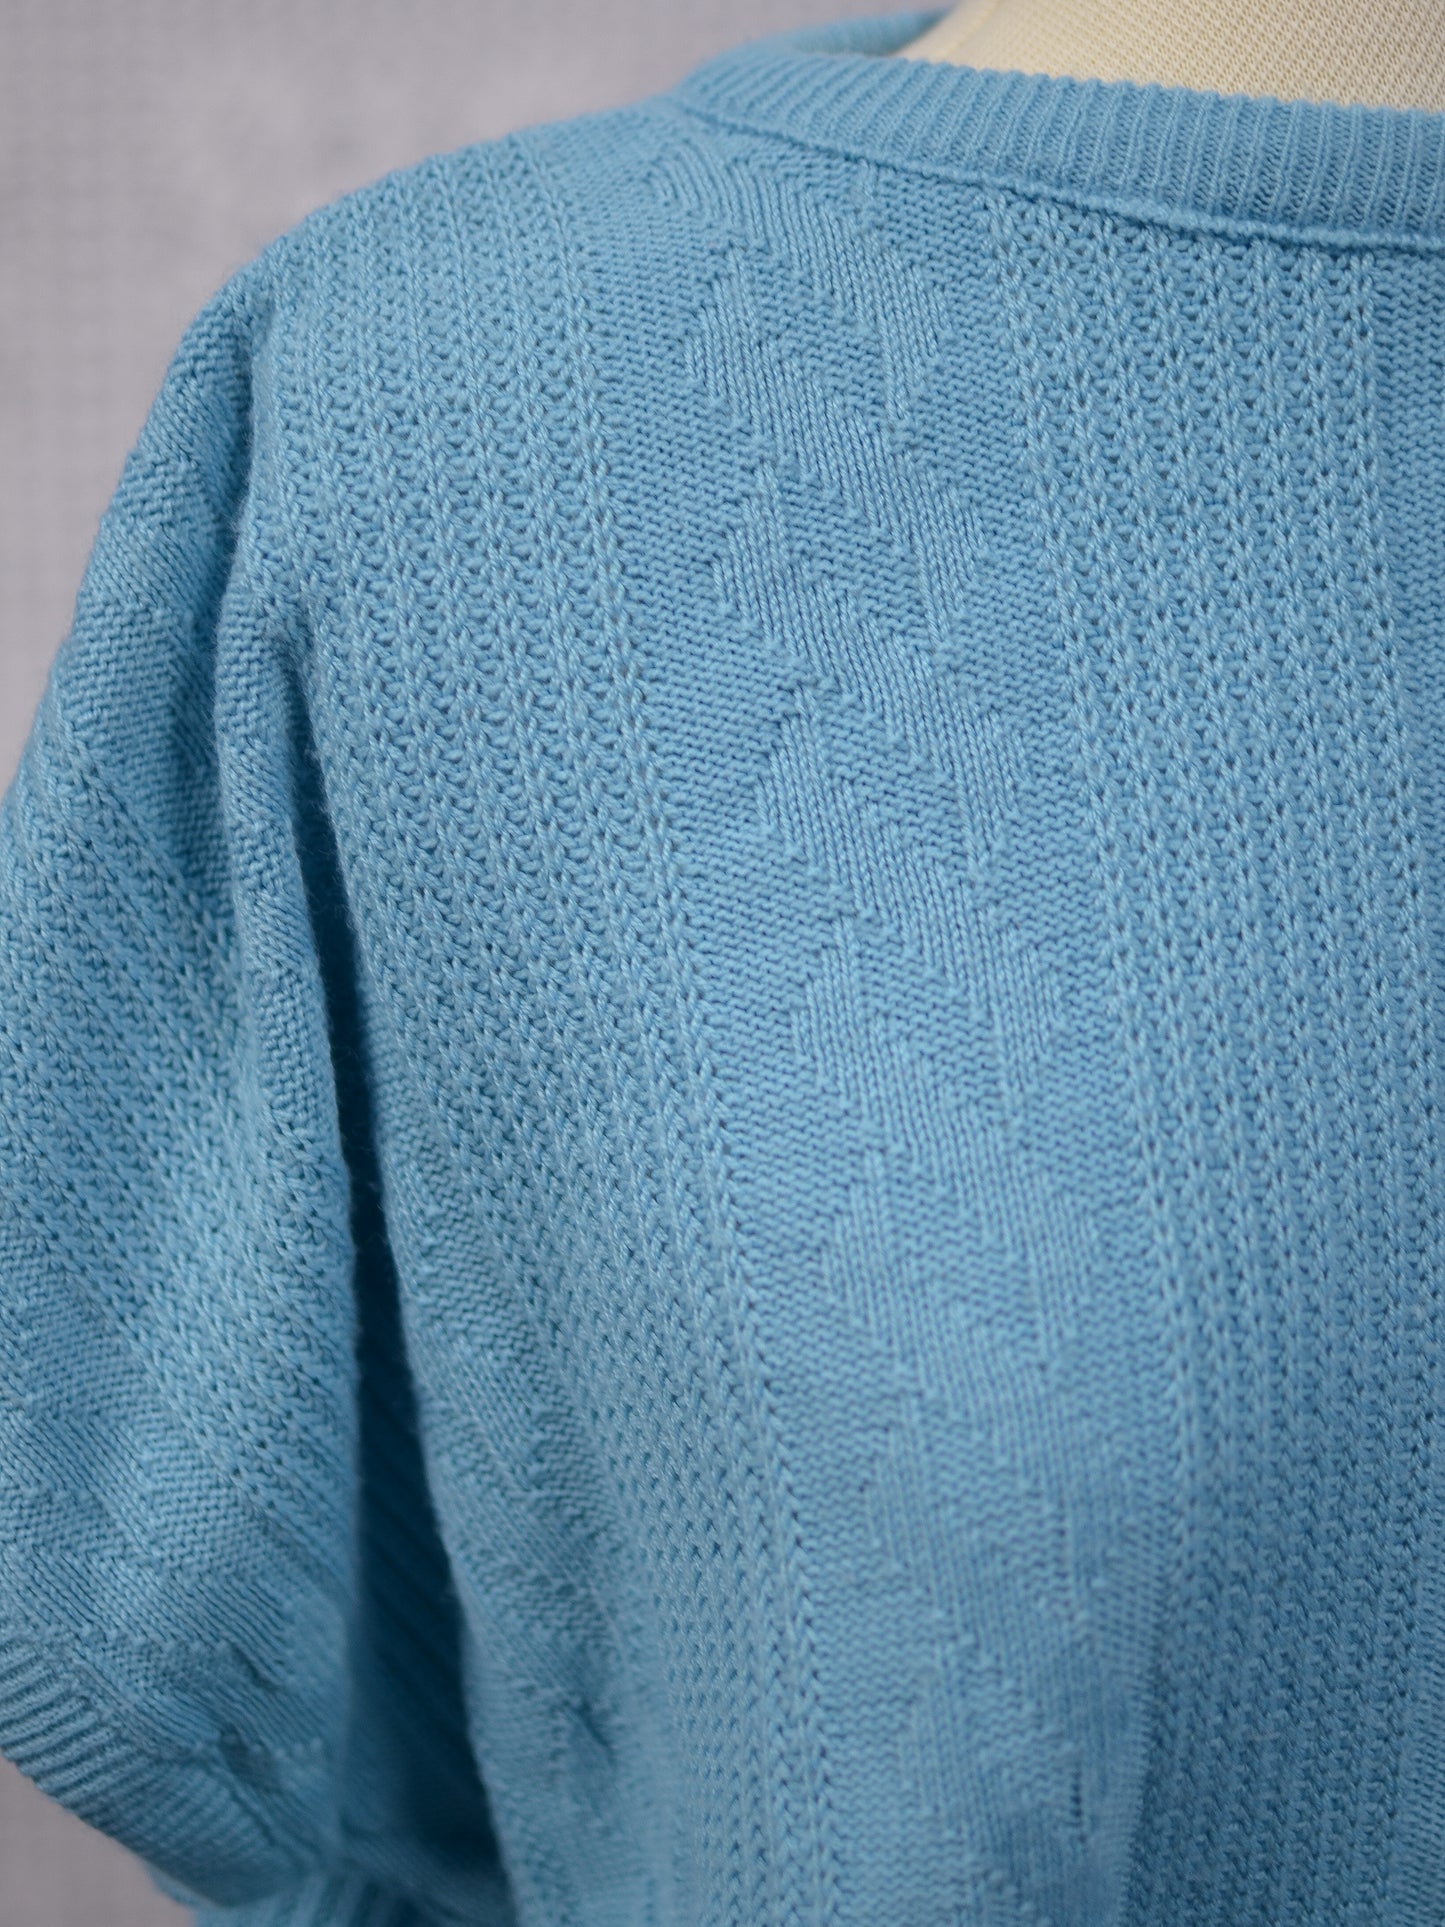 1980s turquoise slouchy sleeveless jumper